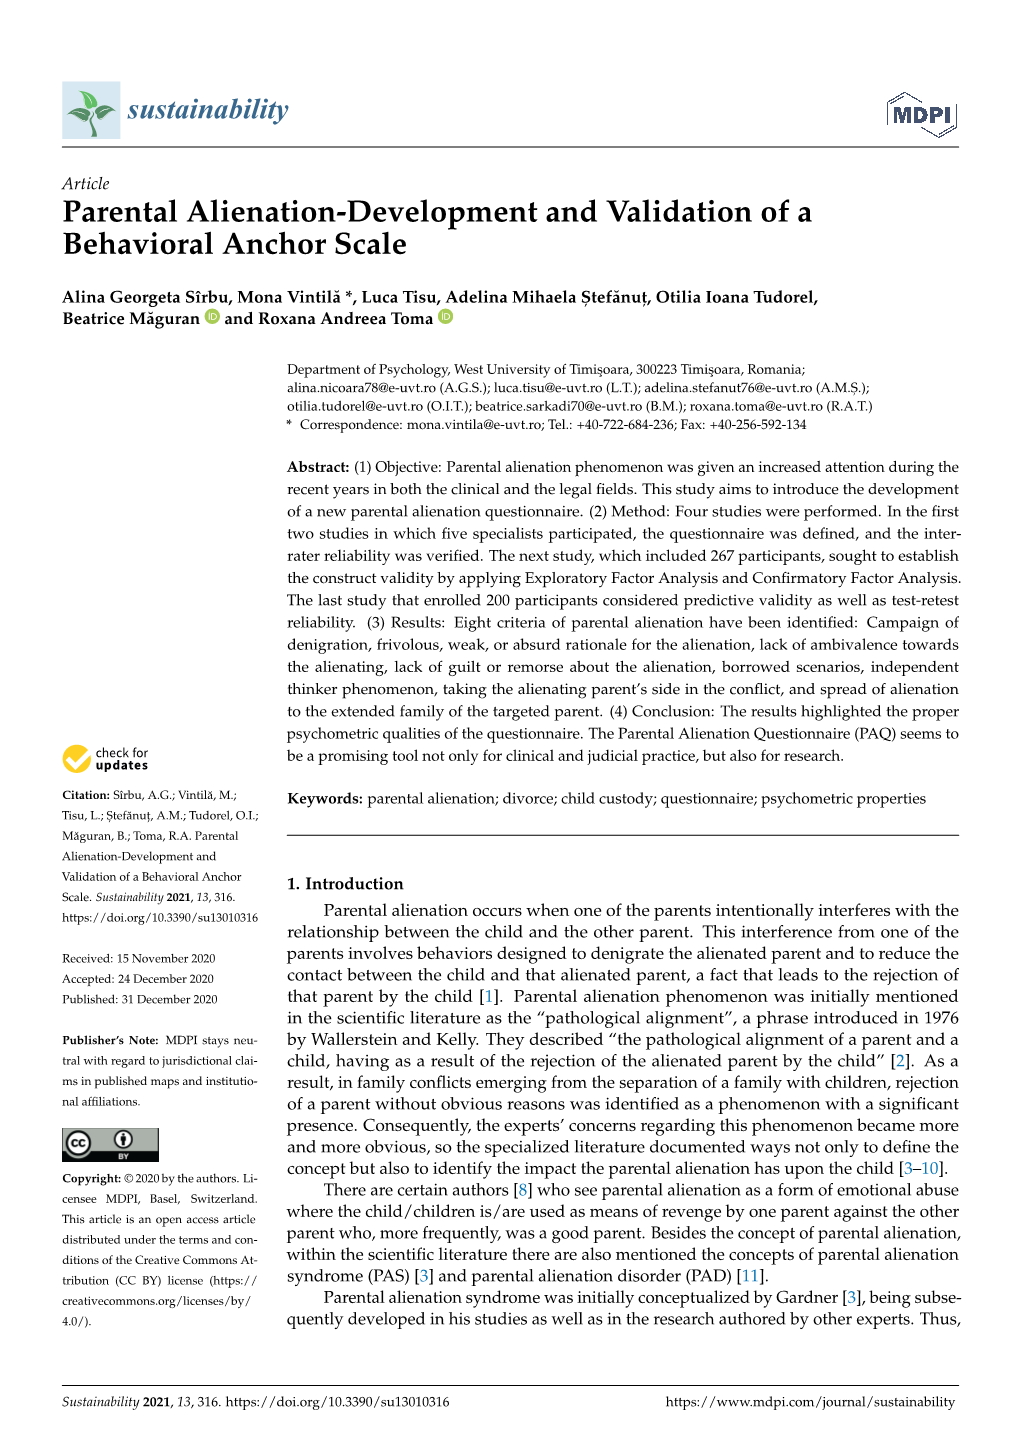 Parental Alienation-Development and Validation of a Behavioral Anchor Scale